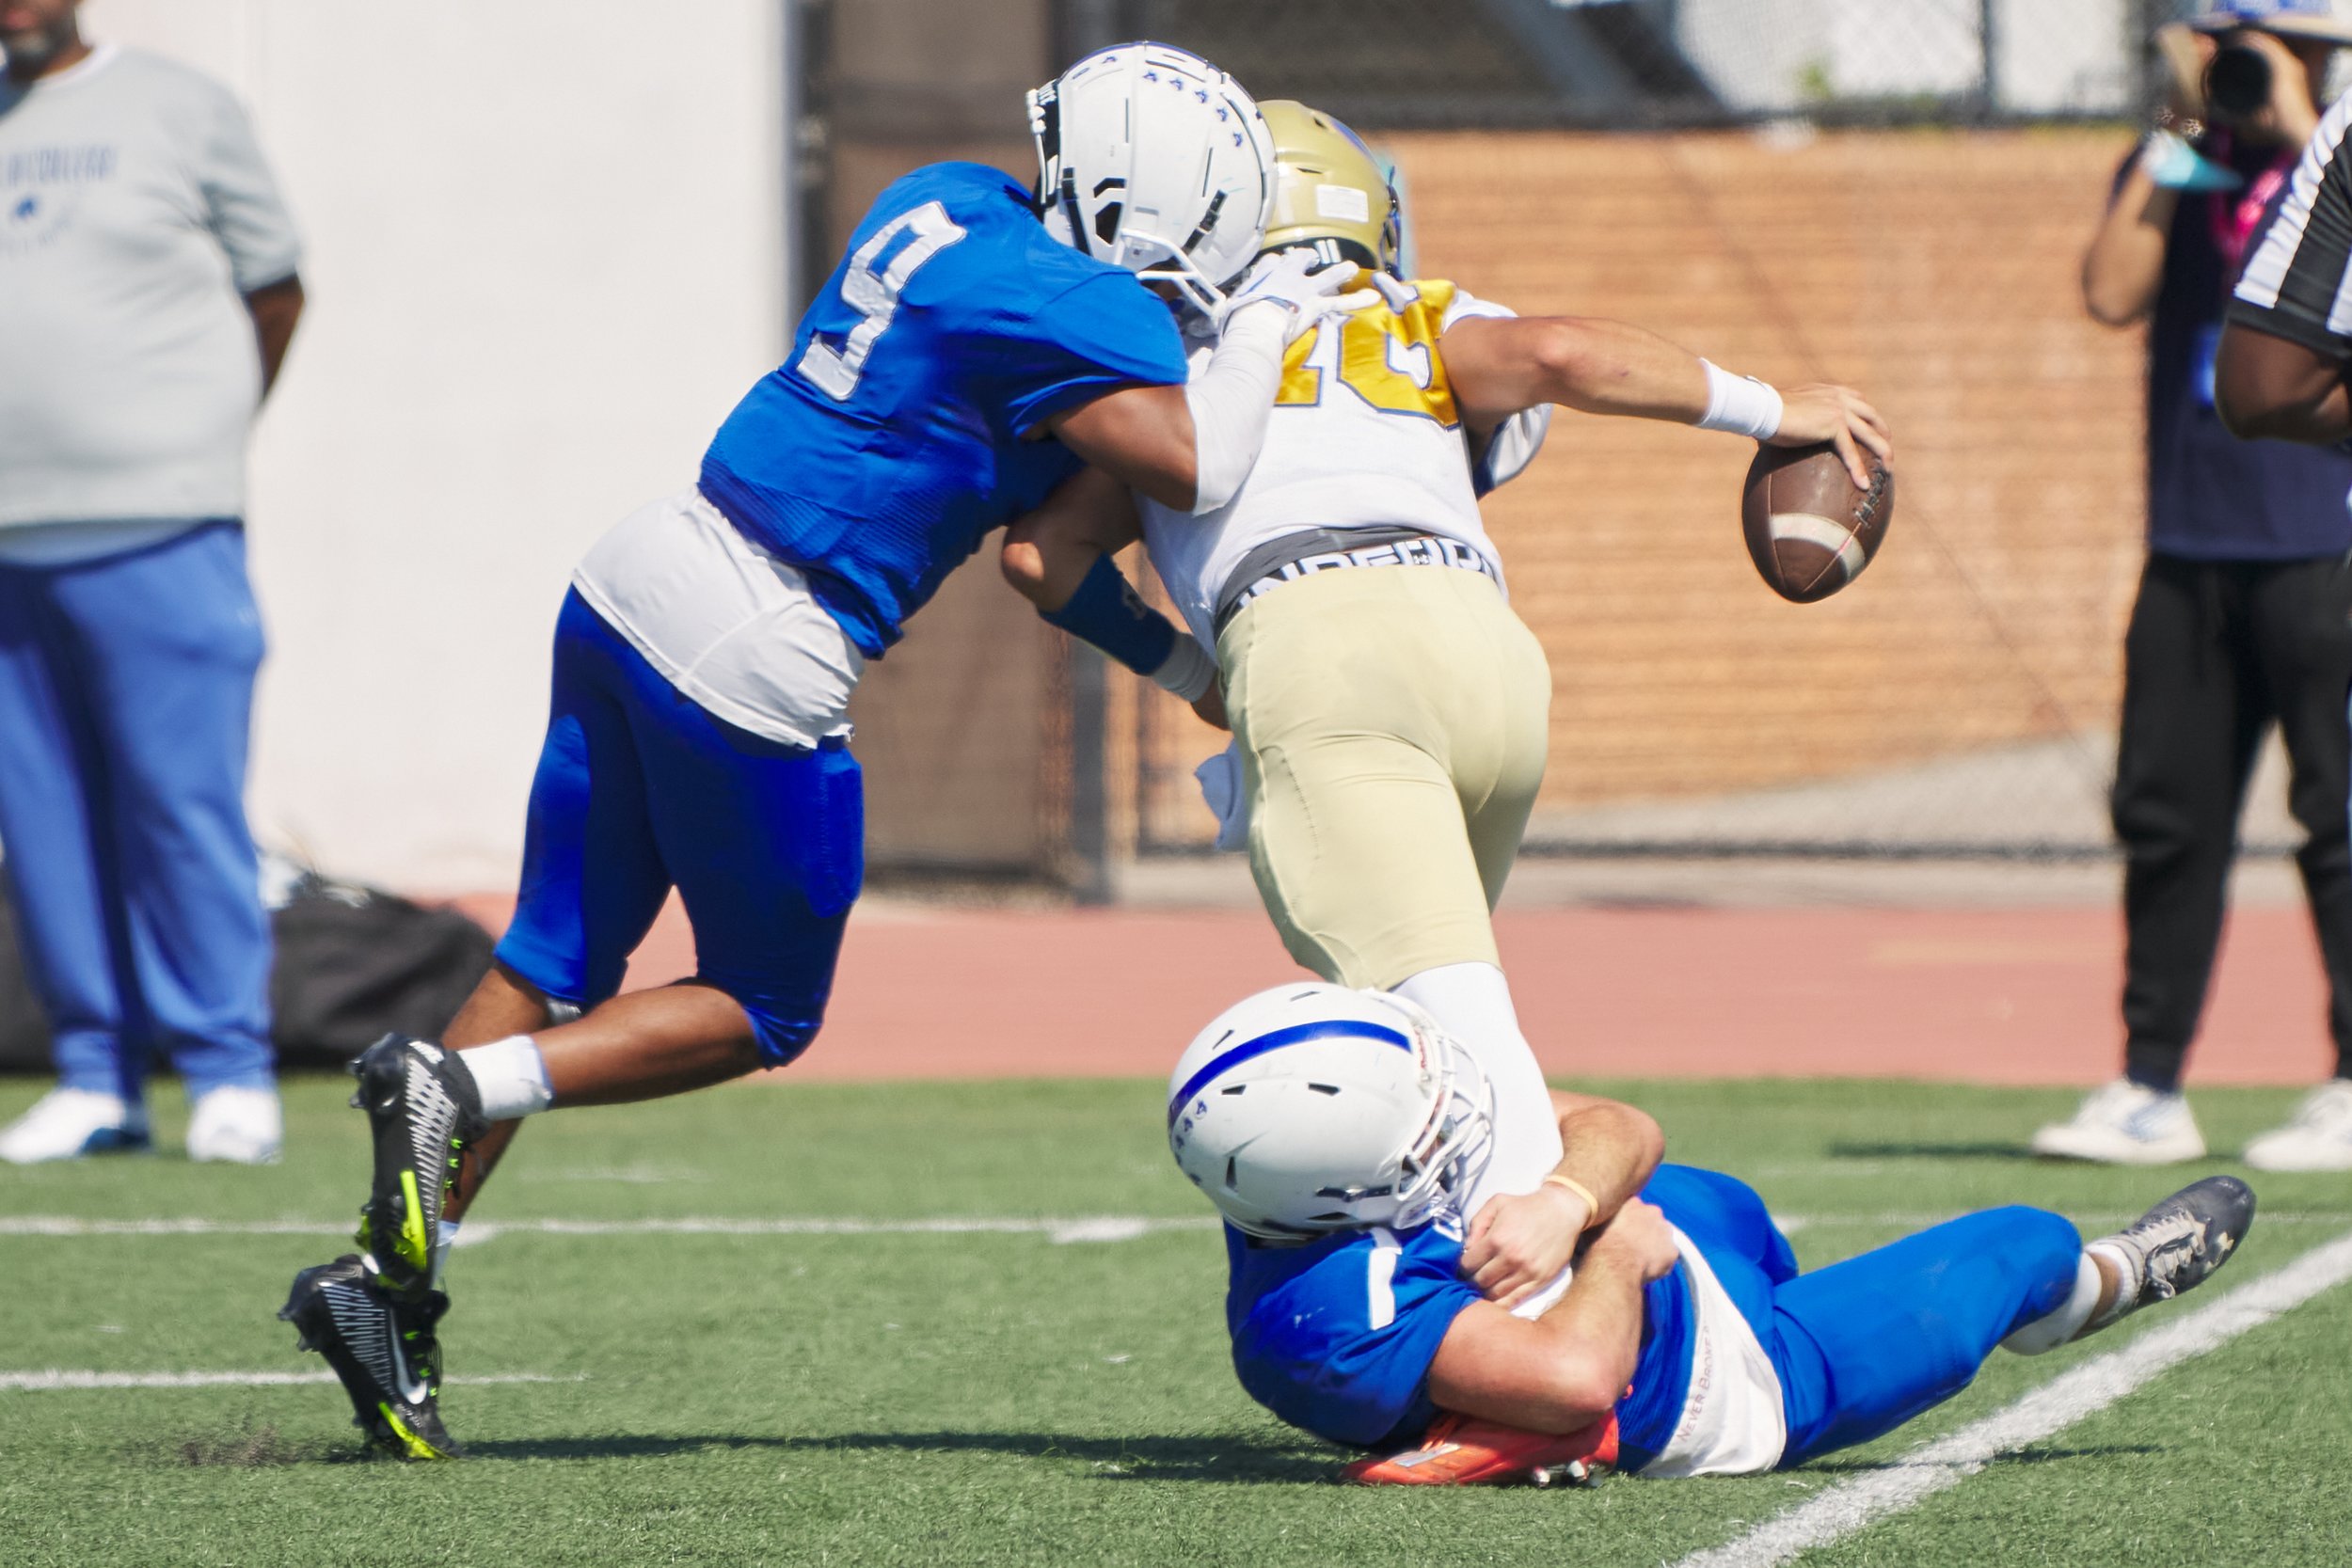  Santa Monica College Corsairs' Kylan Keeler holds on to West Los Angeles Wildcats' David Oliveros so that fellow Corsair Kayden Thomas can attack during the football match on Saturday, October 1, 2022, at Corsair Field in Santa Monica, Calif. The Co